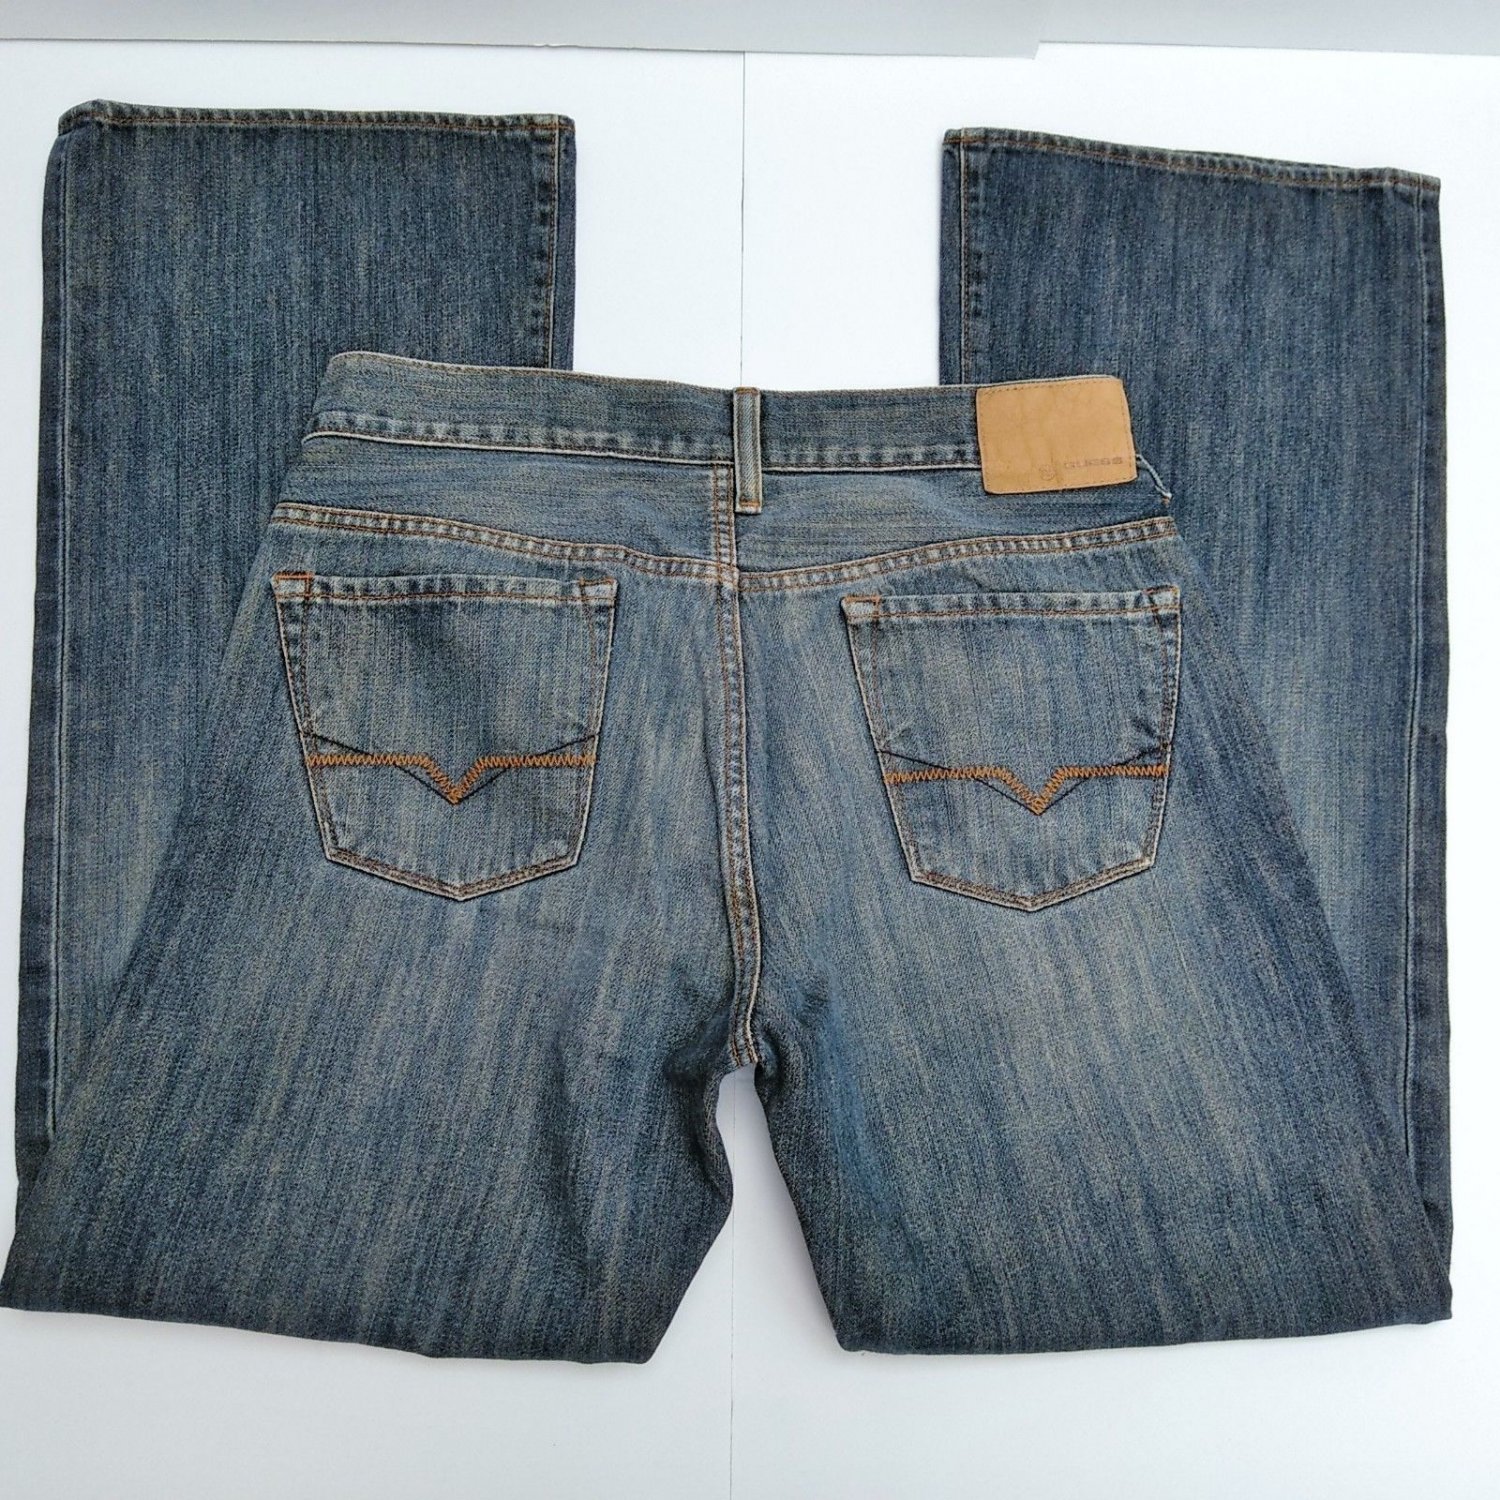 Guess BootCut Relaxed Fit Mens Jeans Size 31 x 30 Distressed Wash